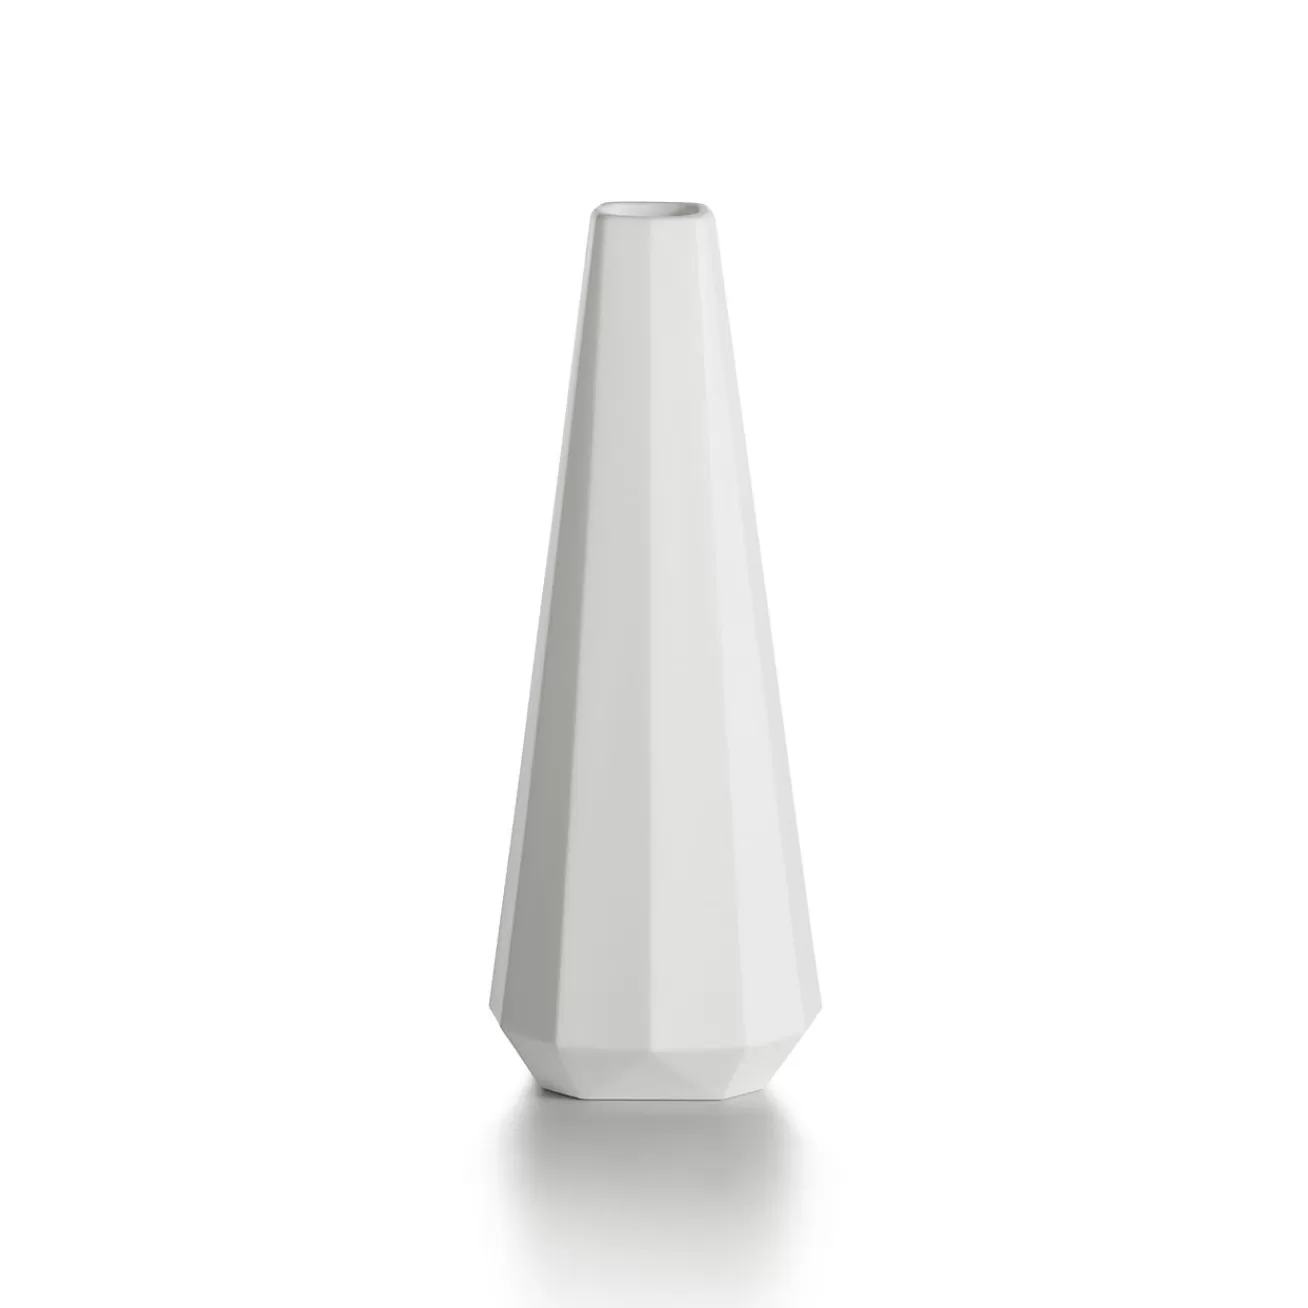 Tiffany & Co. Tiffany Facets Medium Tapered Vase in Bone China | ^ The Home | Housewarming Gifts